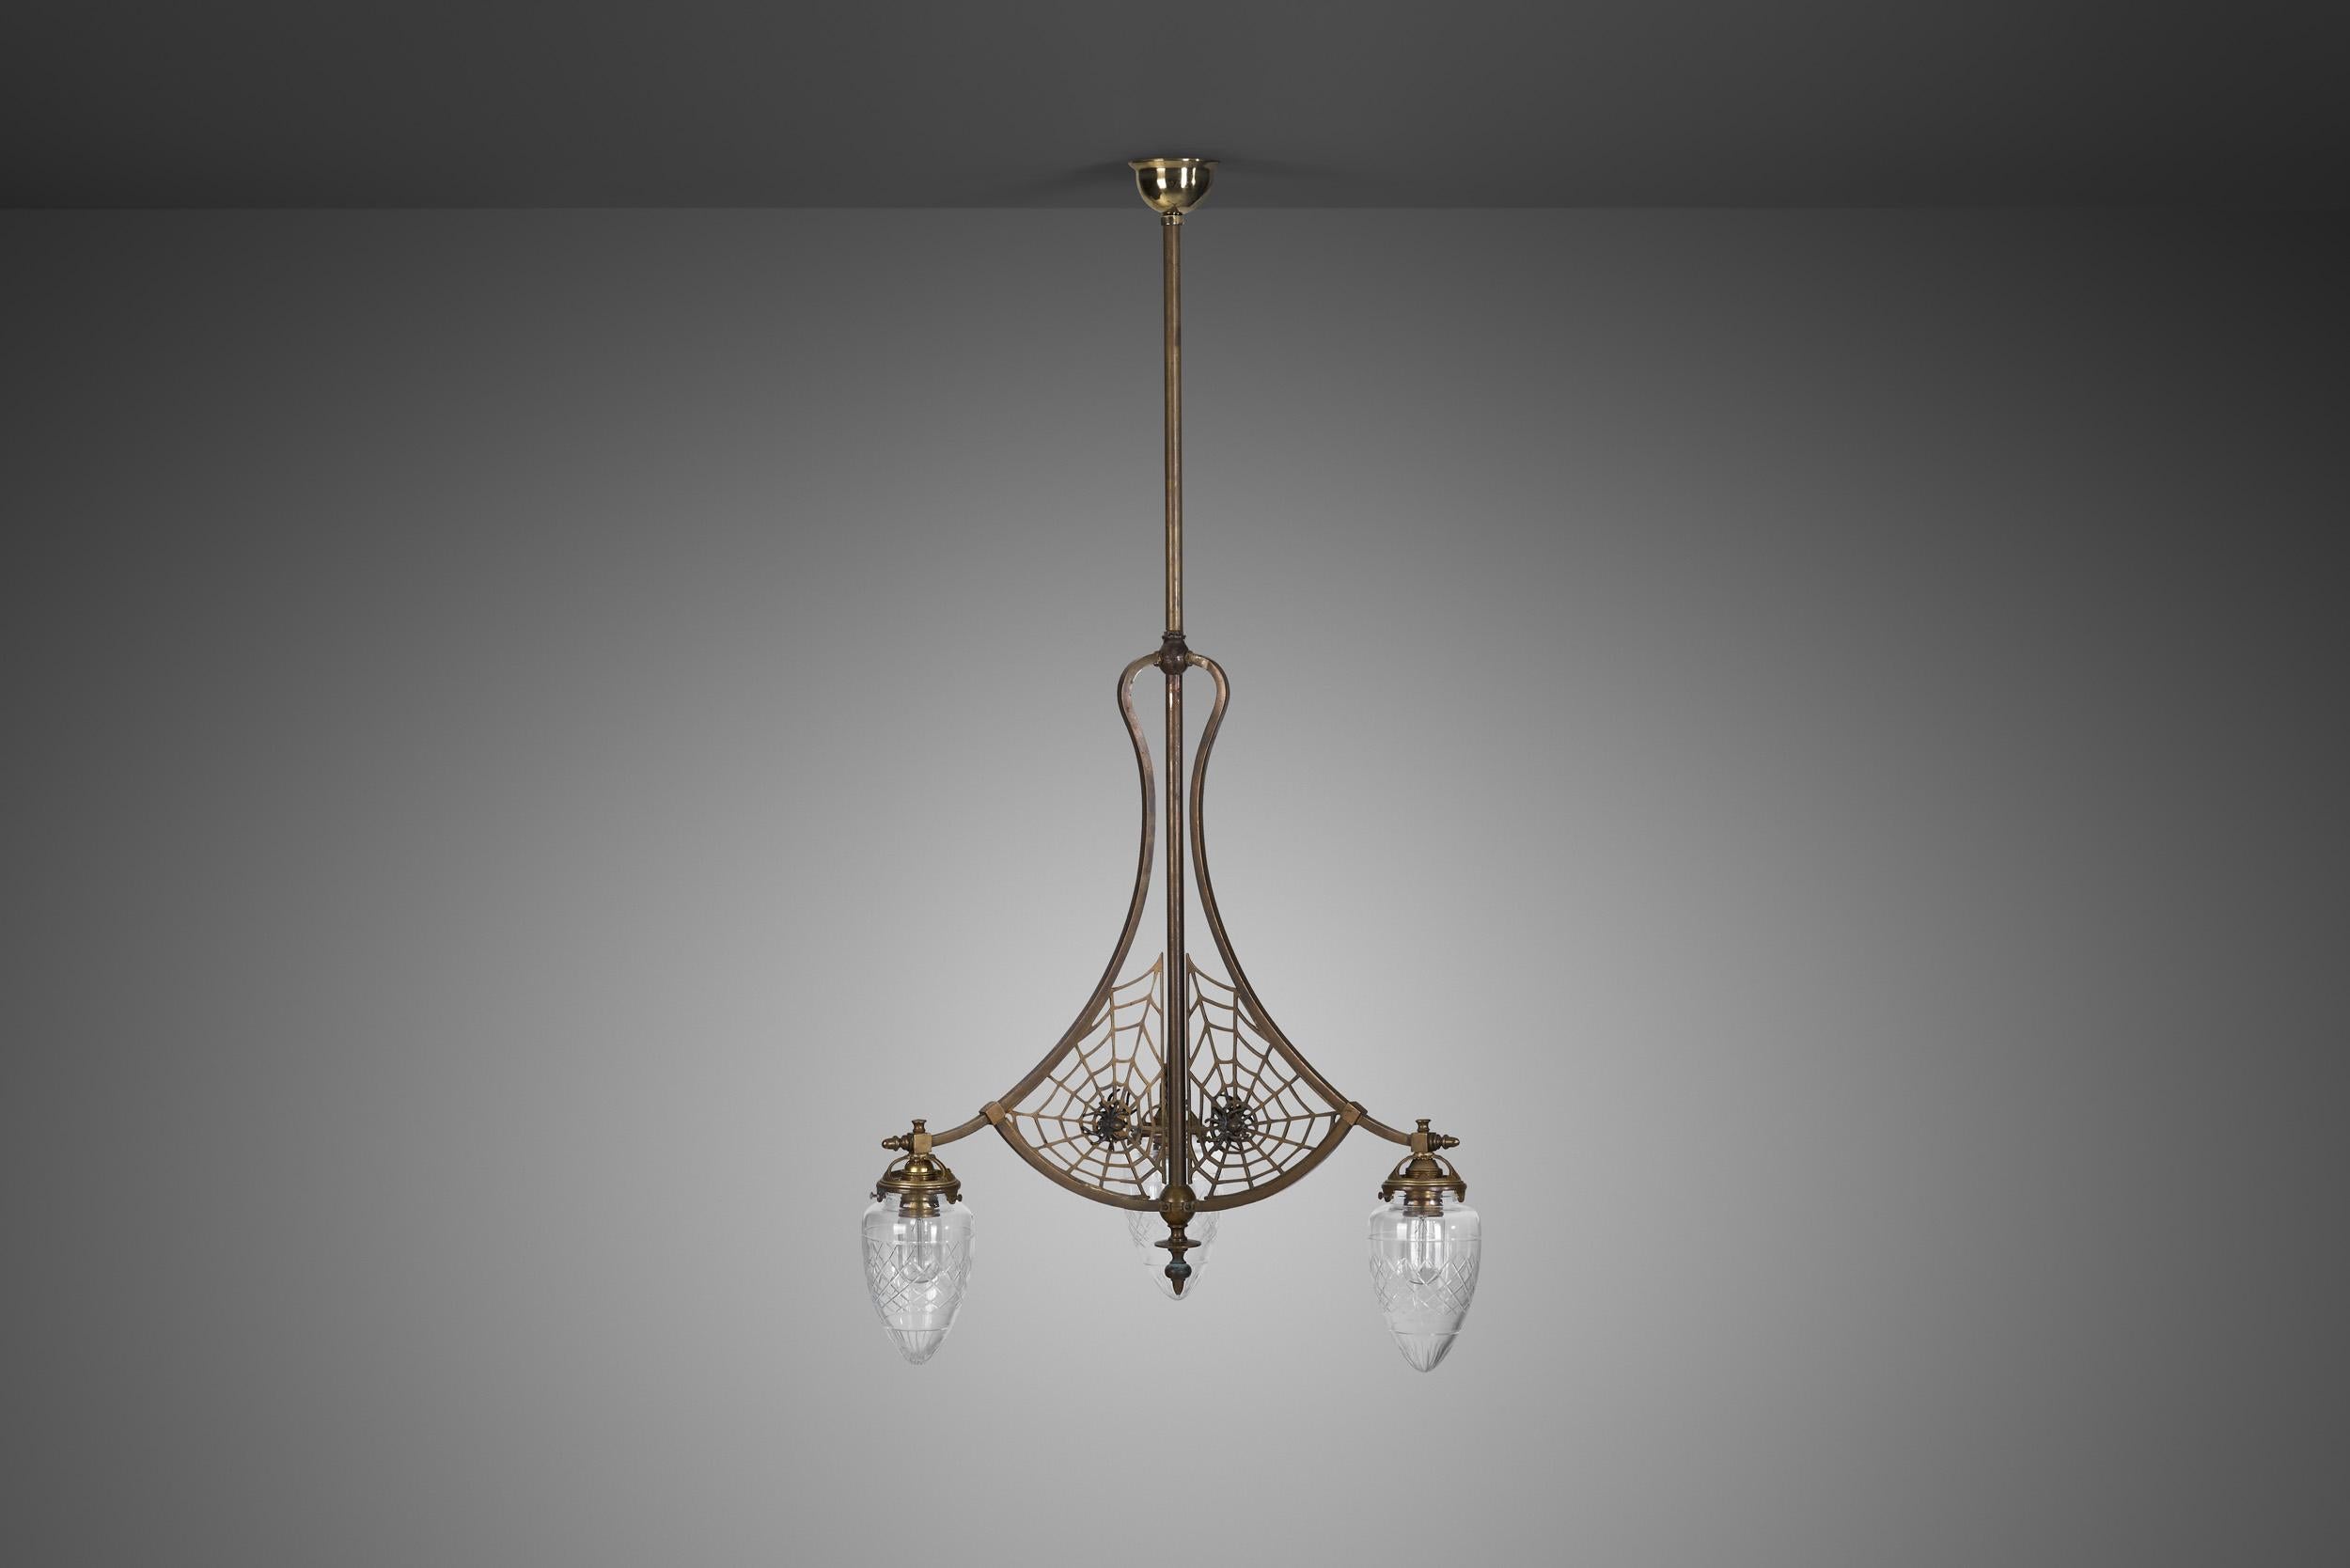 European Art Nouveau Brass Ceiling Lamp with Glass Shades and Spider Nets, Europe 1900s For Sale